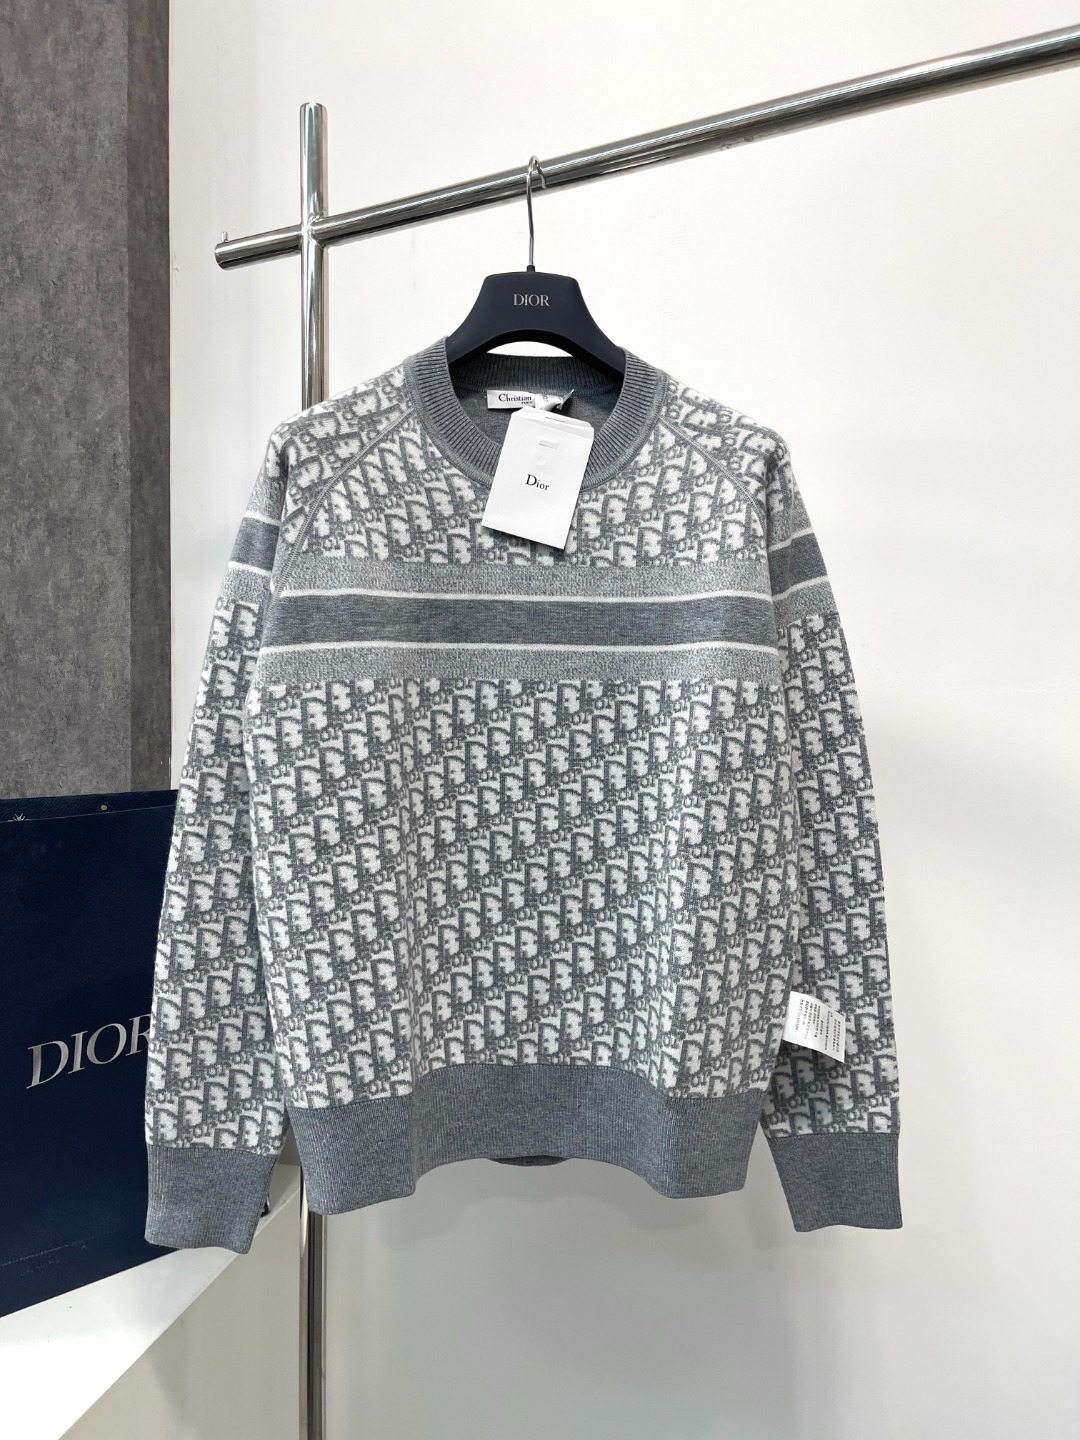 Dior Clothing Knit Sweater Sweatshirts Black Set With Diamonds Knitting Wool Fall/Winter Collection Long Sleeve